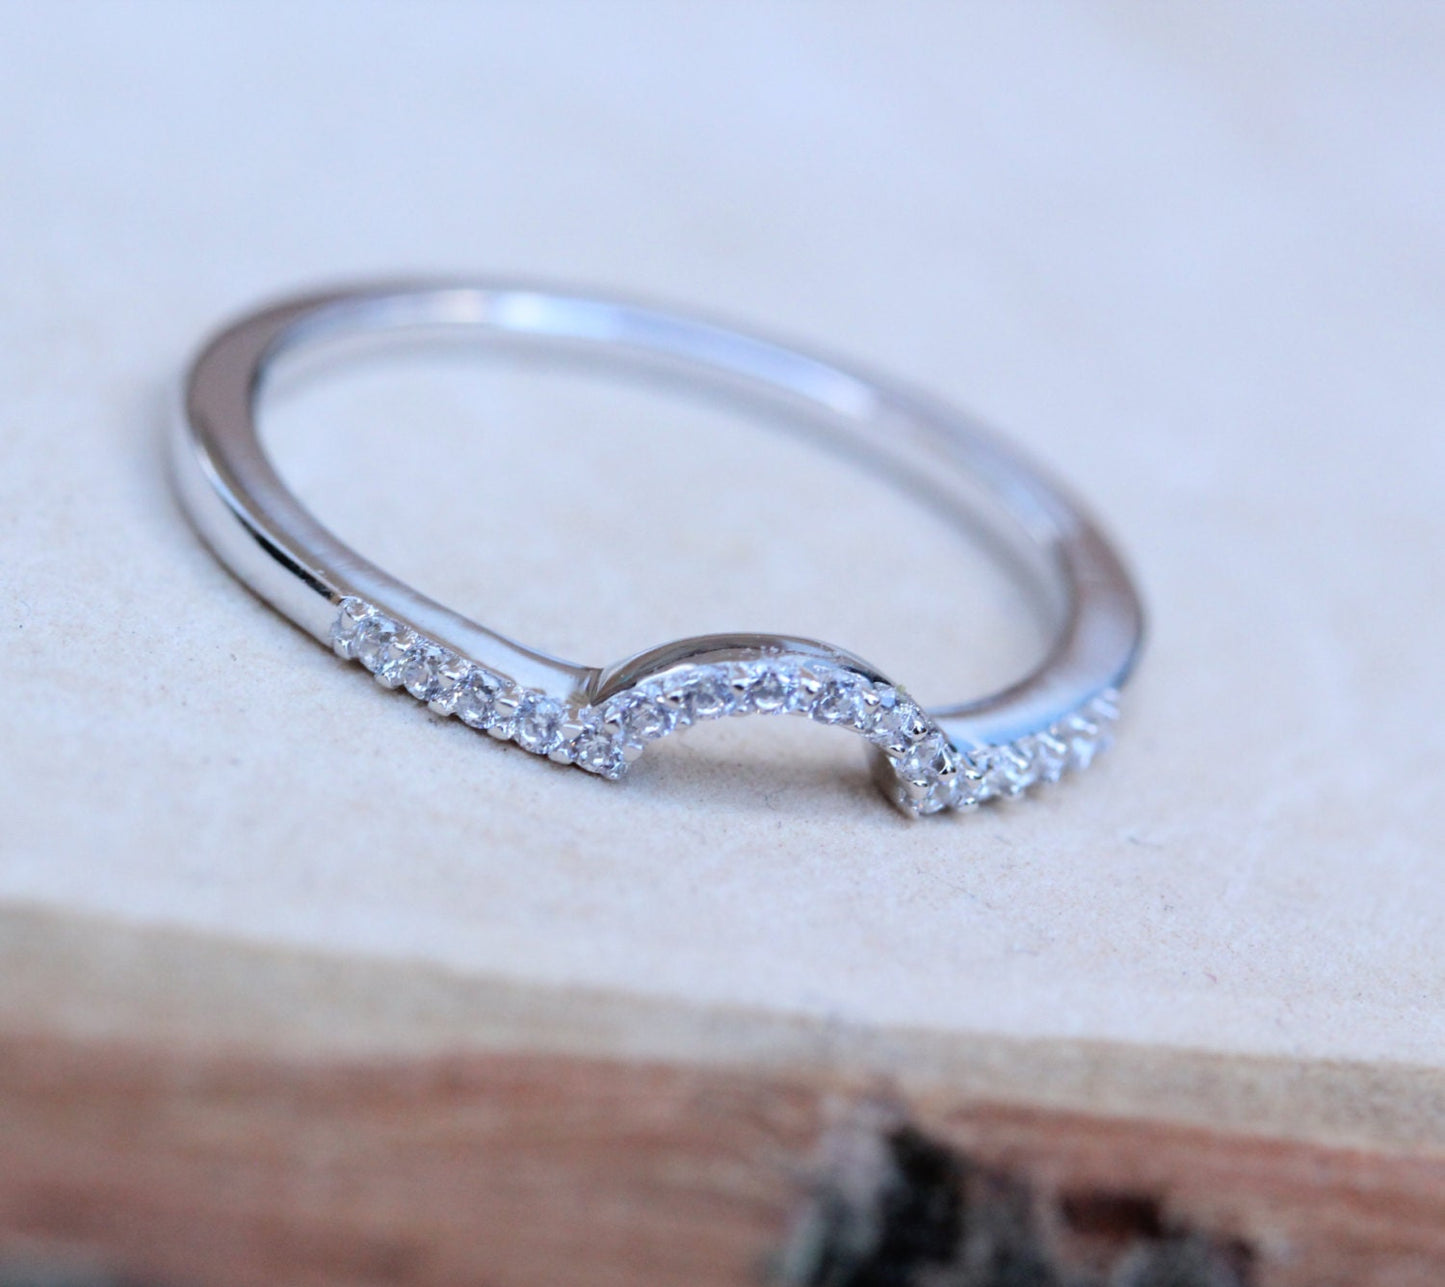 Genuine Moissanite curved Half Eternity ring band - Available in Sterling Silver and White Gold Filled - Handmade